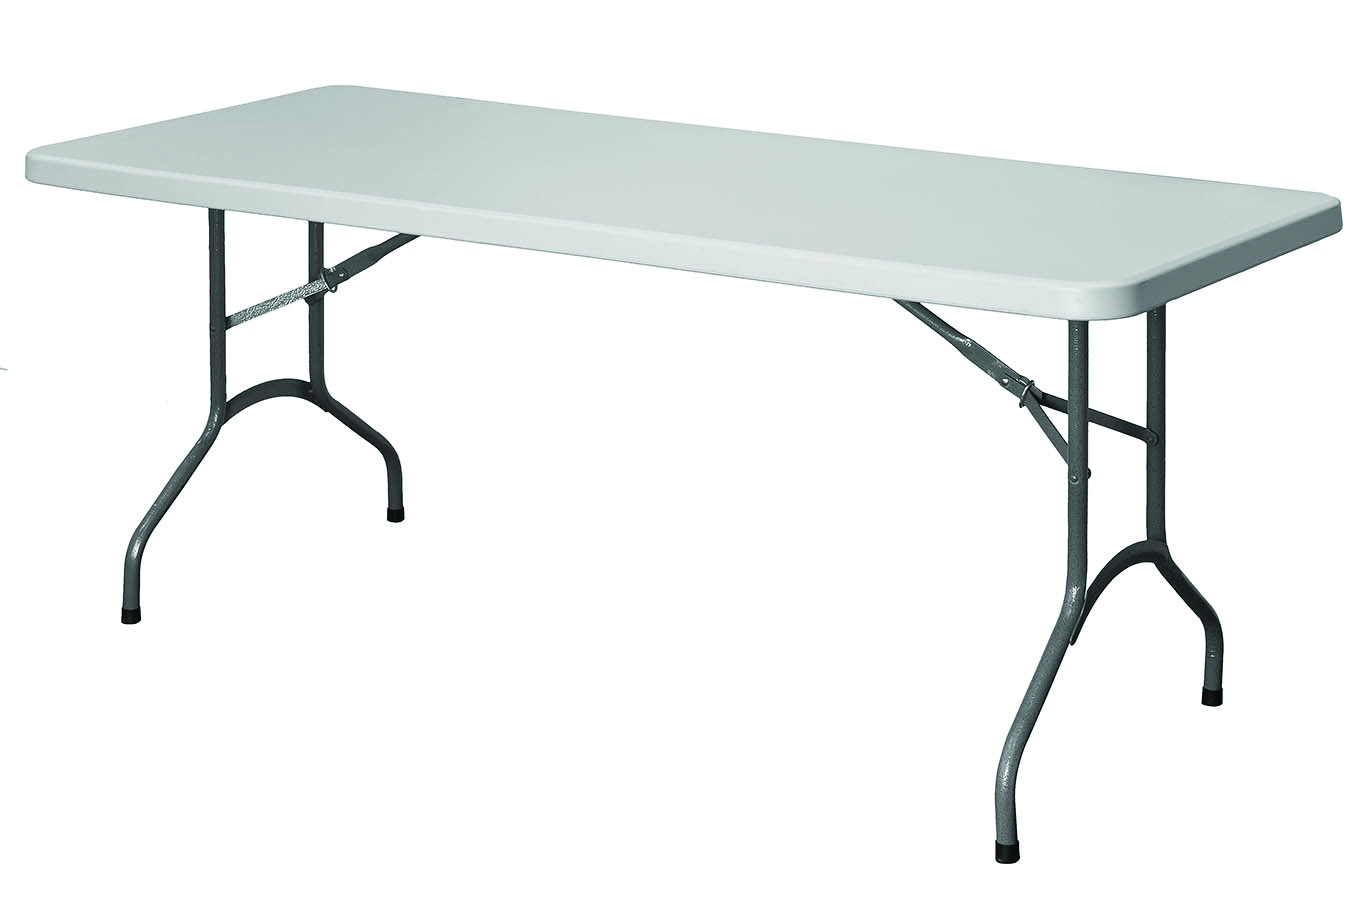 1800 x 600mm Canteen Table with fold down legs and plastic feet